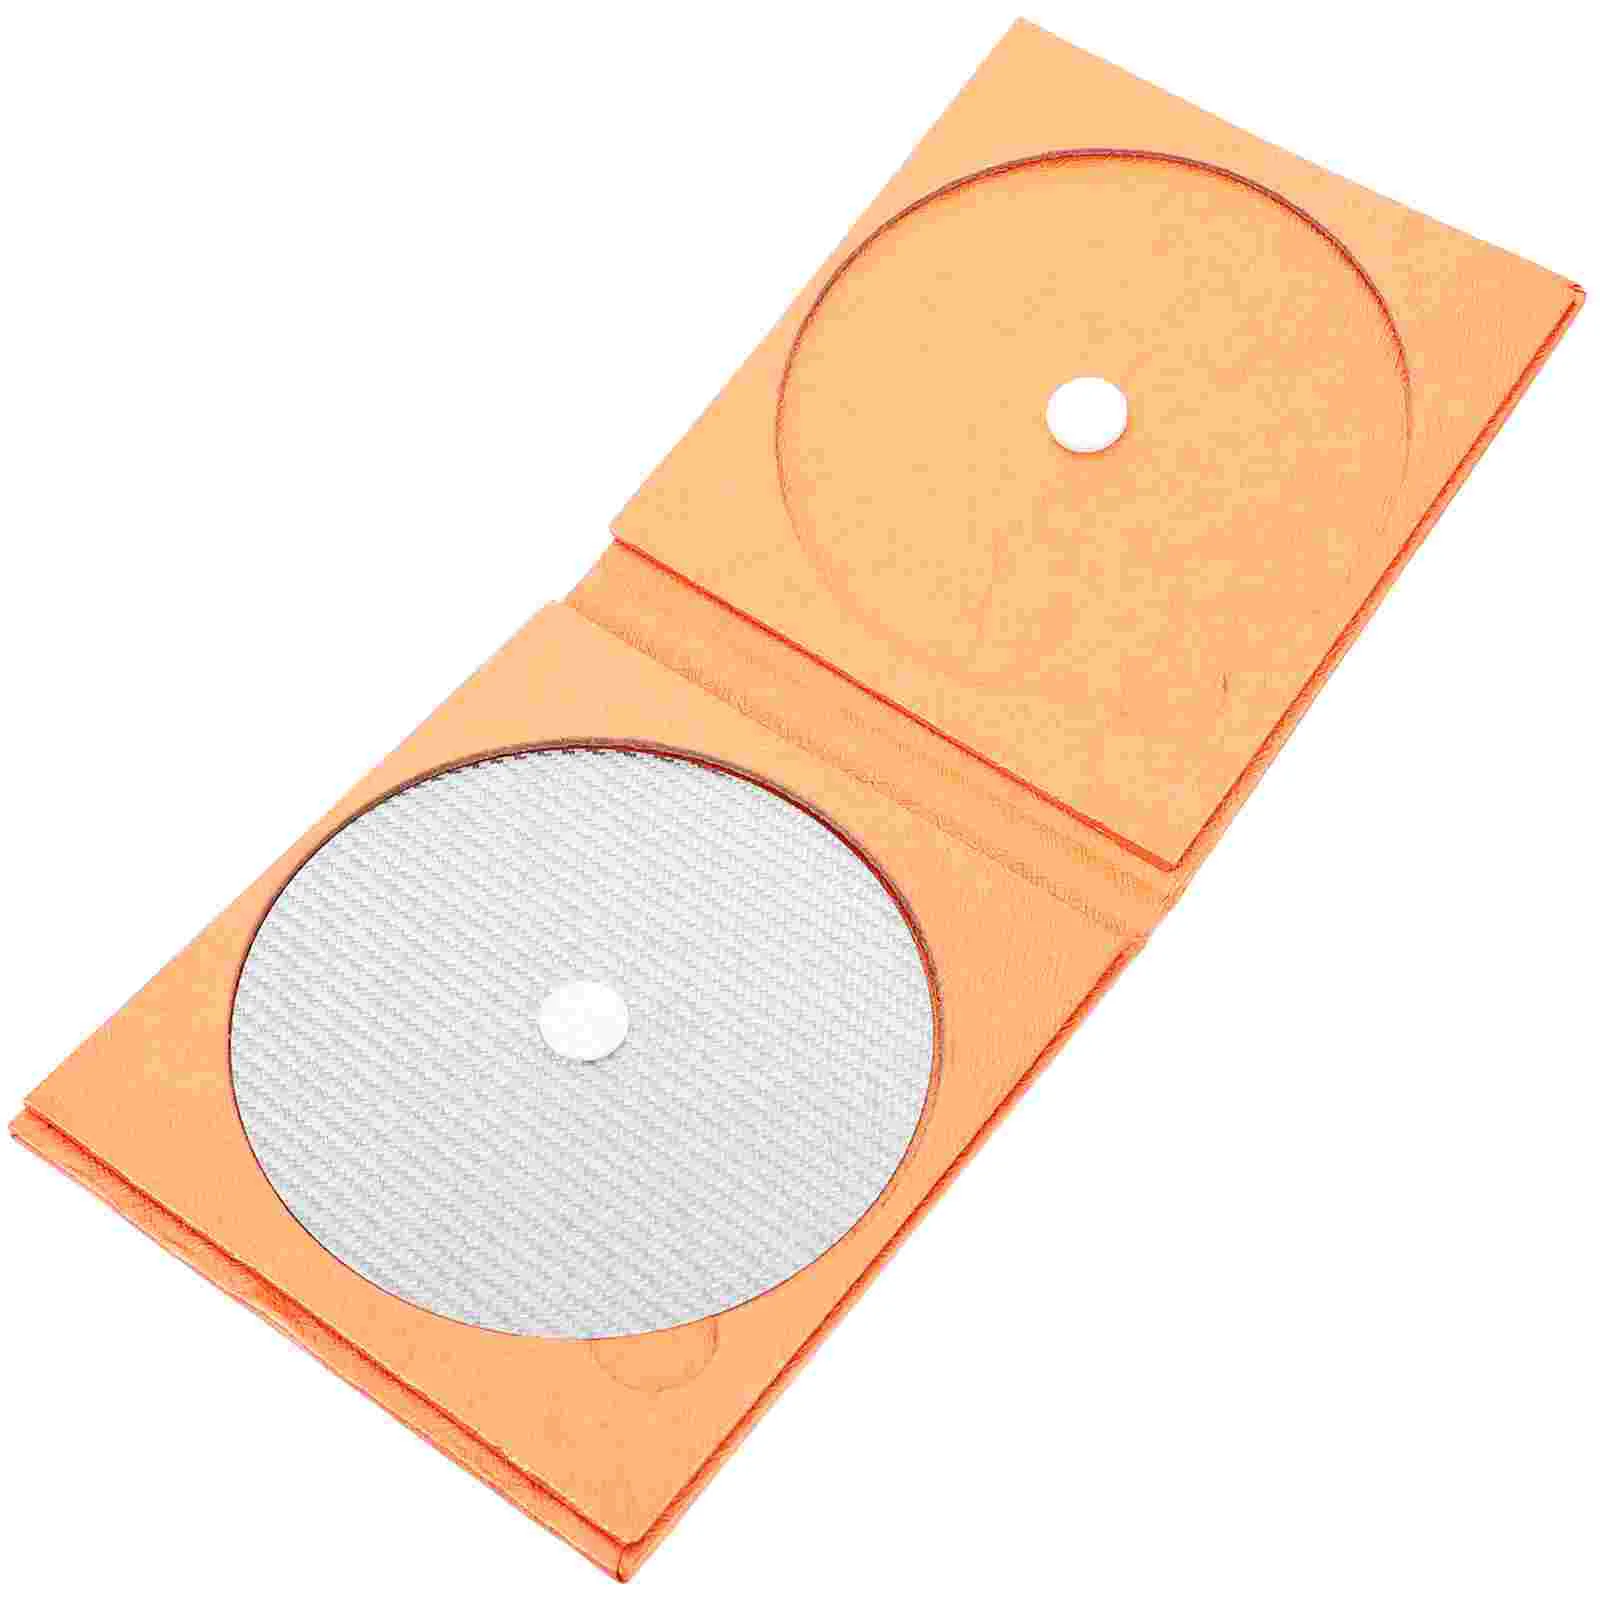 

CD Tuning Pad Player DVD Disc for CDs Stabilizer Mat Accessories Carbon Fiber Pads